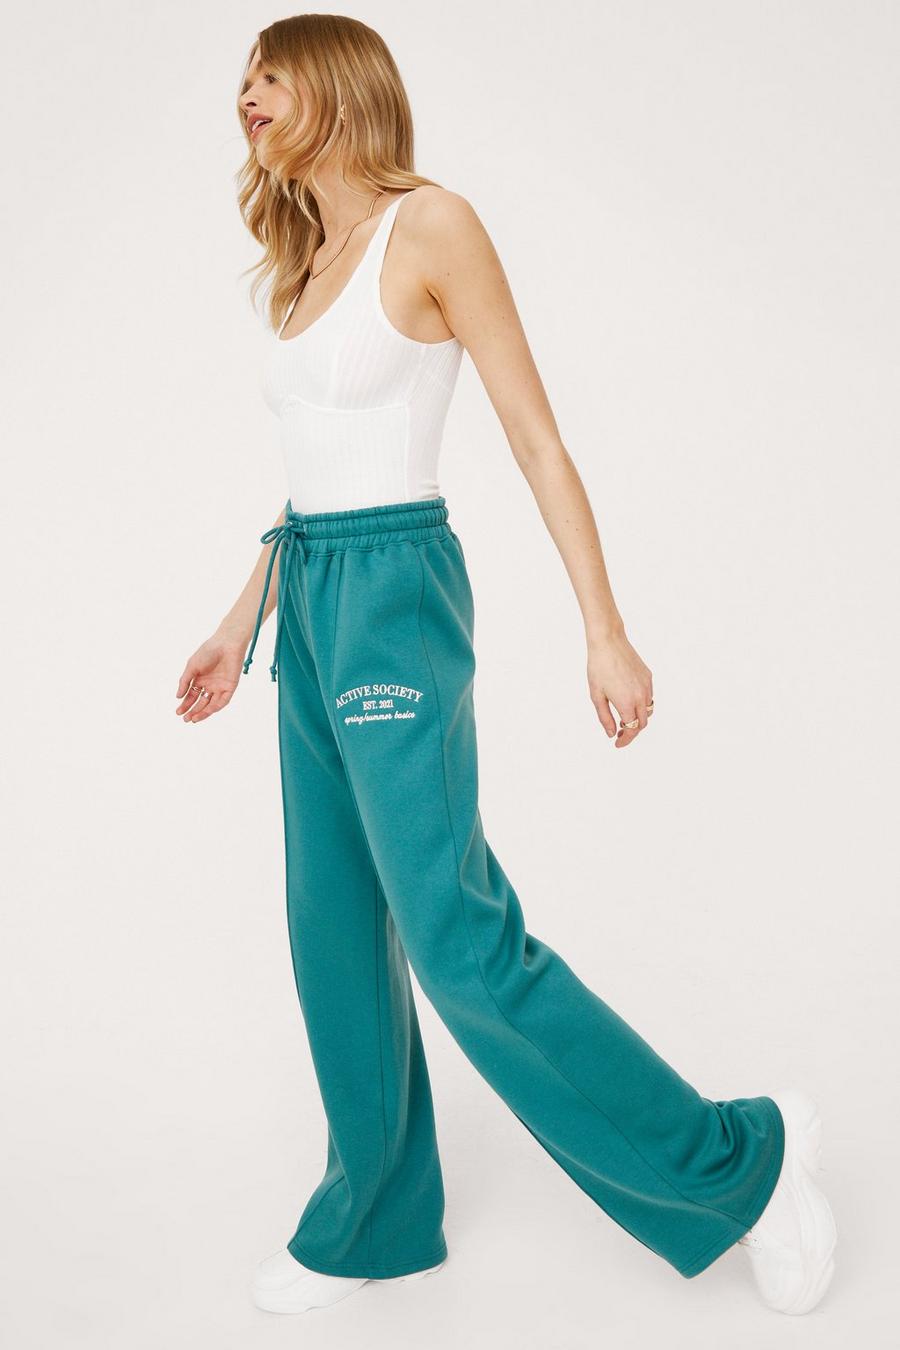 Teal green Active Society Graphic Wide Leg Joggers